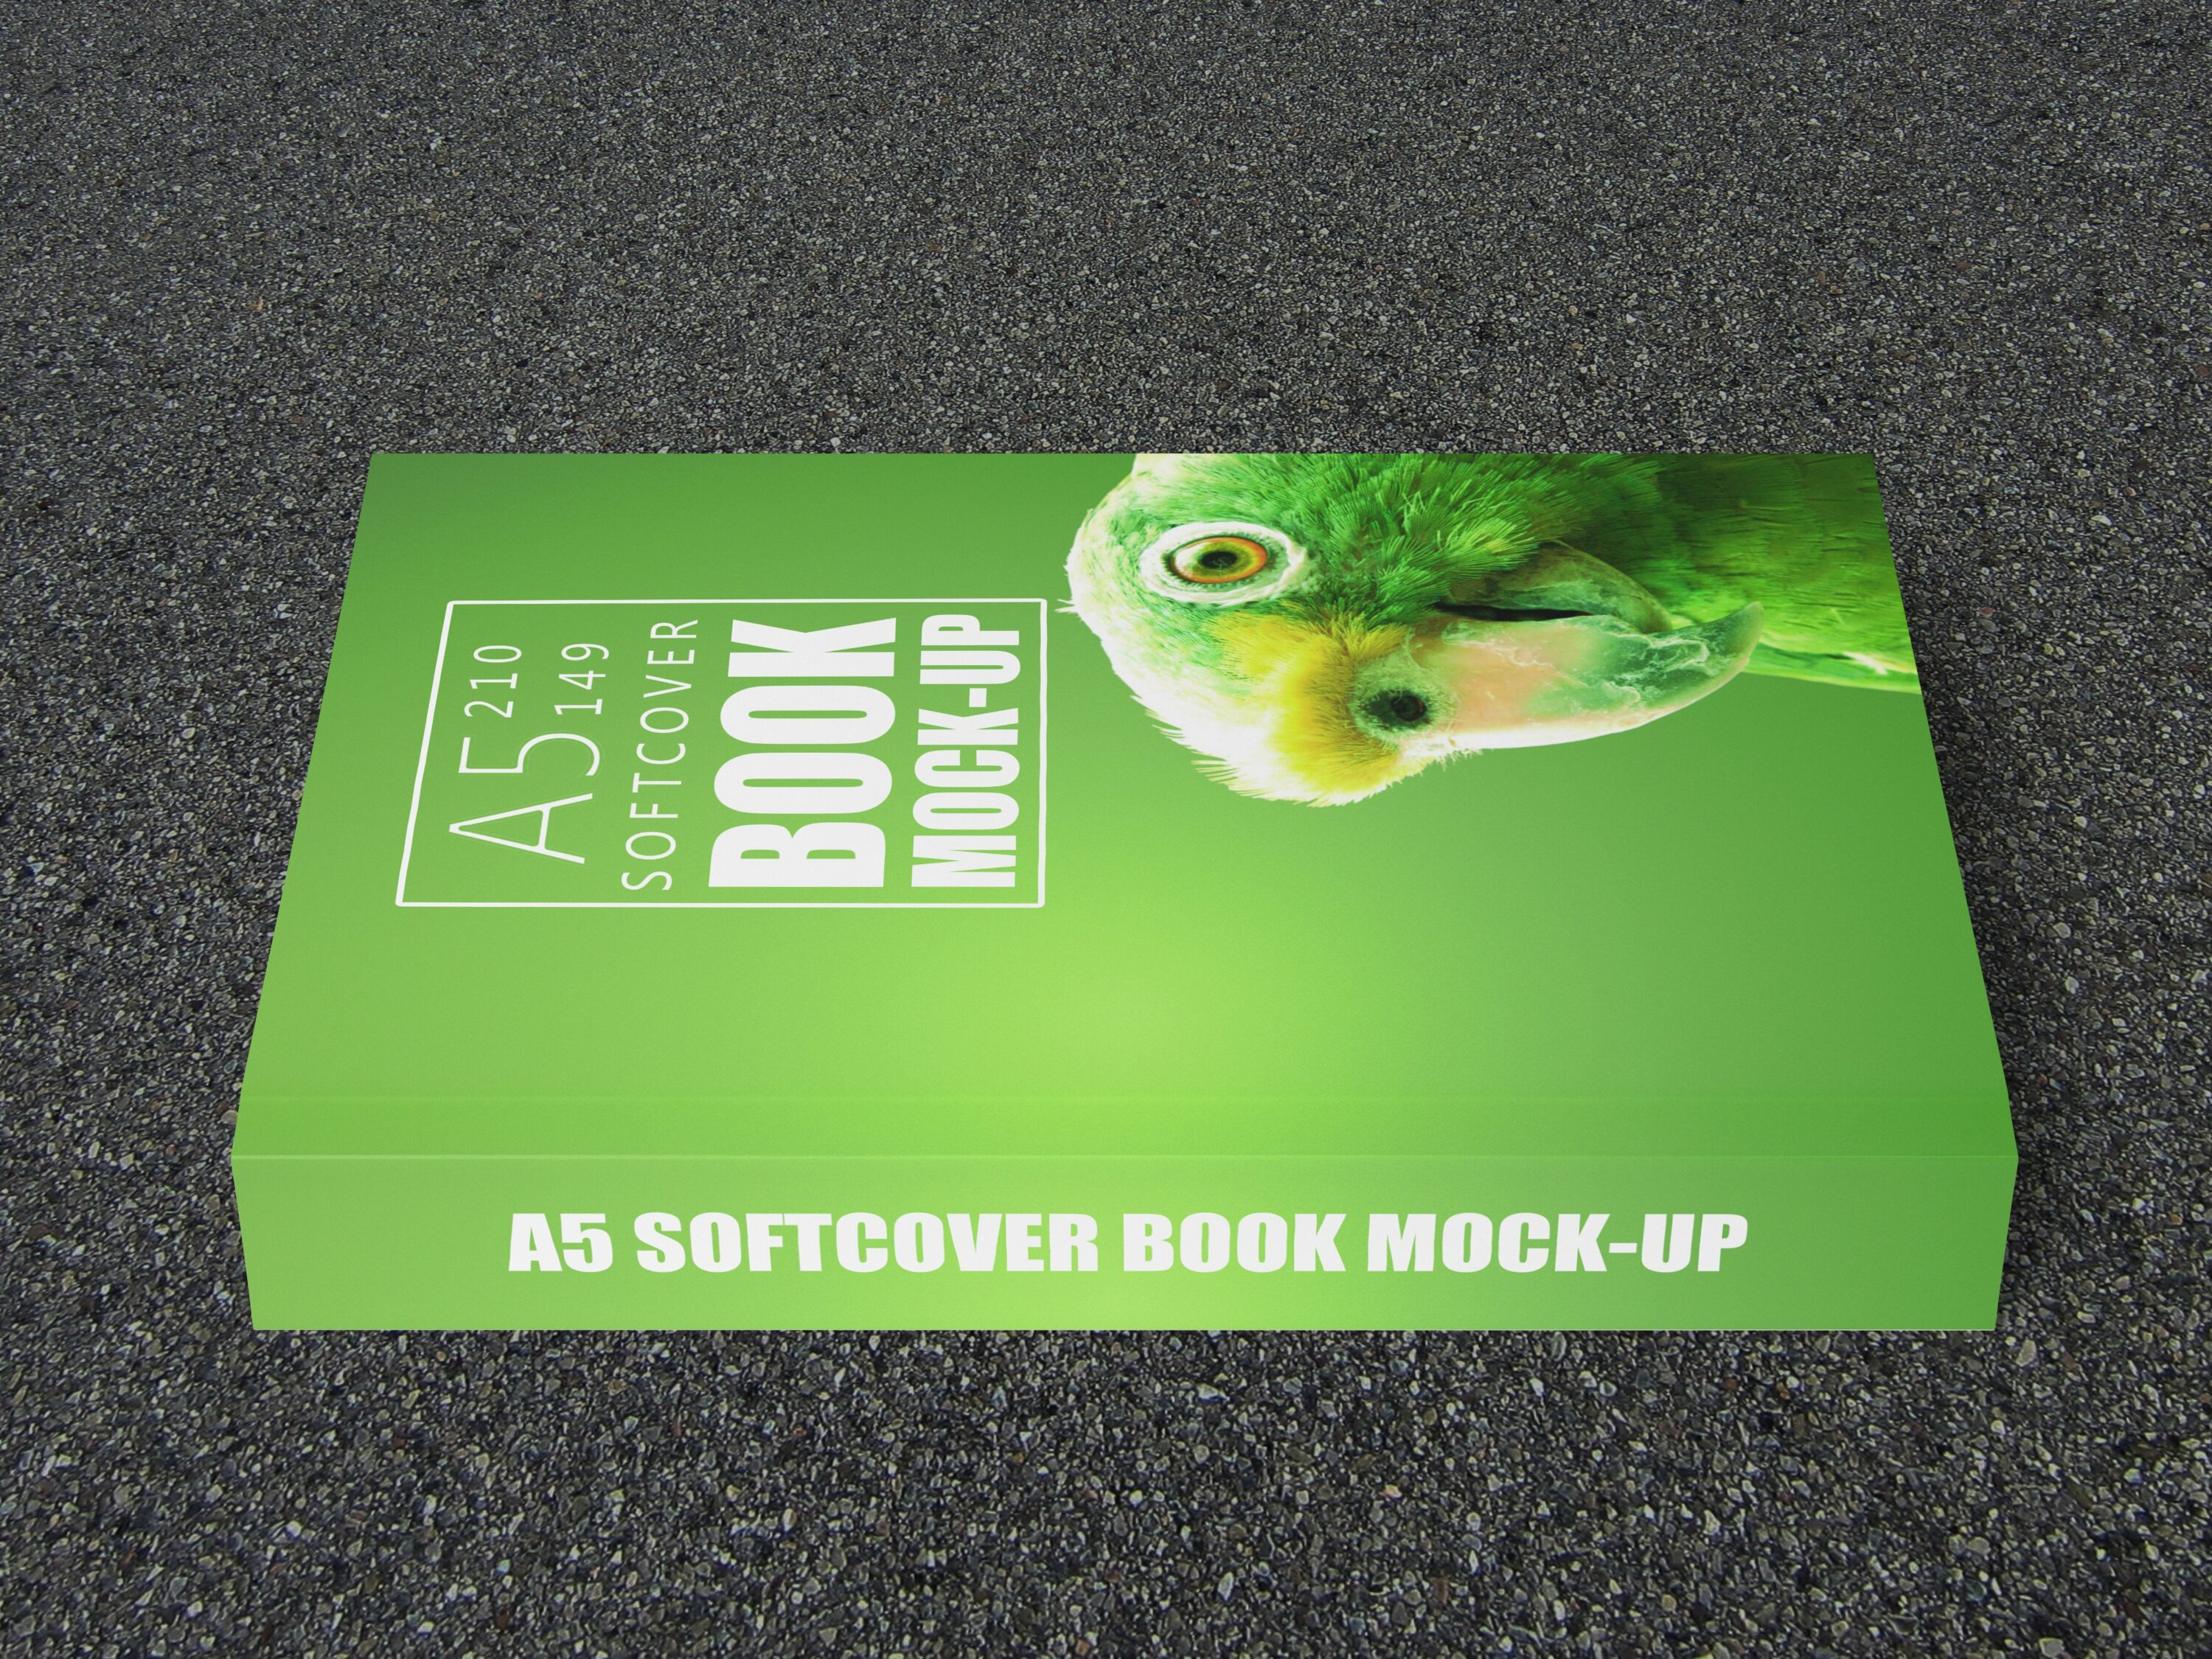 Big green book with a green parrot.